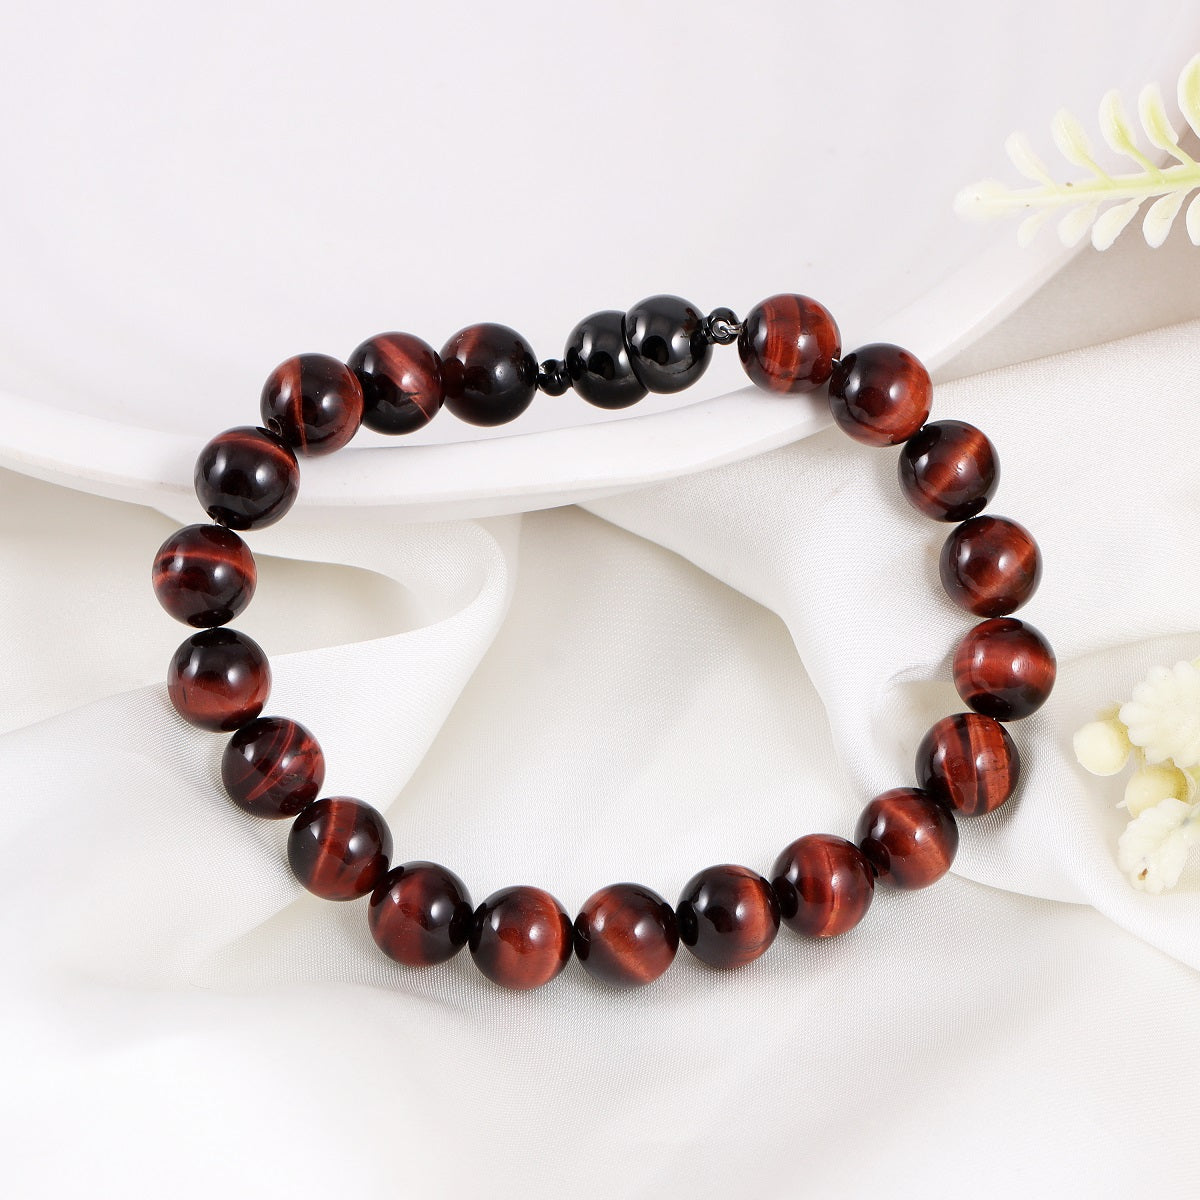 An image featuring the red tiger's eye gemstones alongside keywords like motivation, confidence, and empowerment, symbolizing their metaphysical properties.